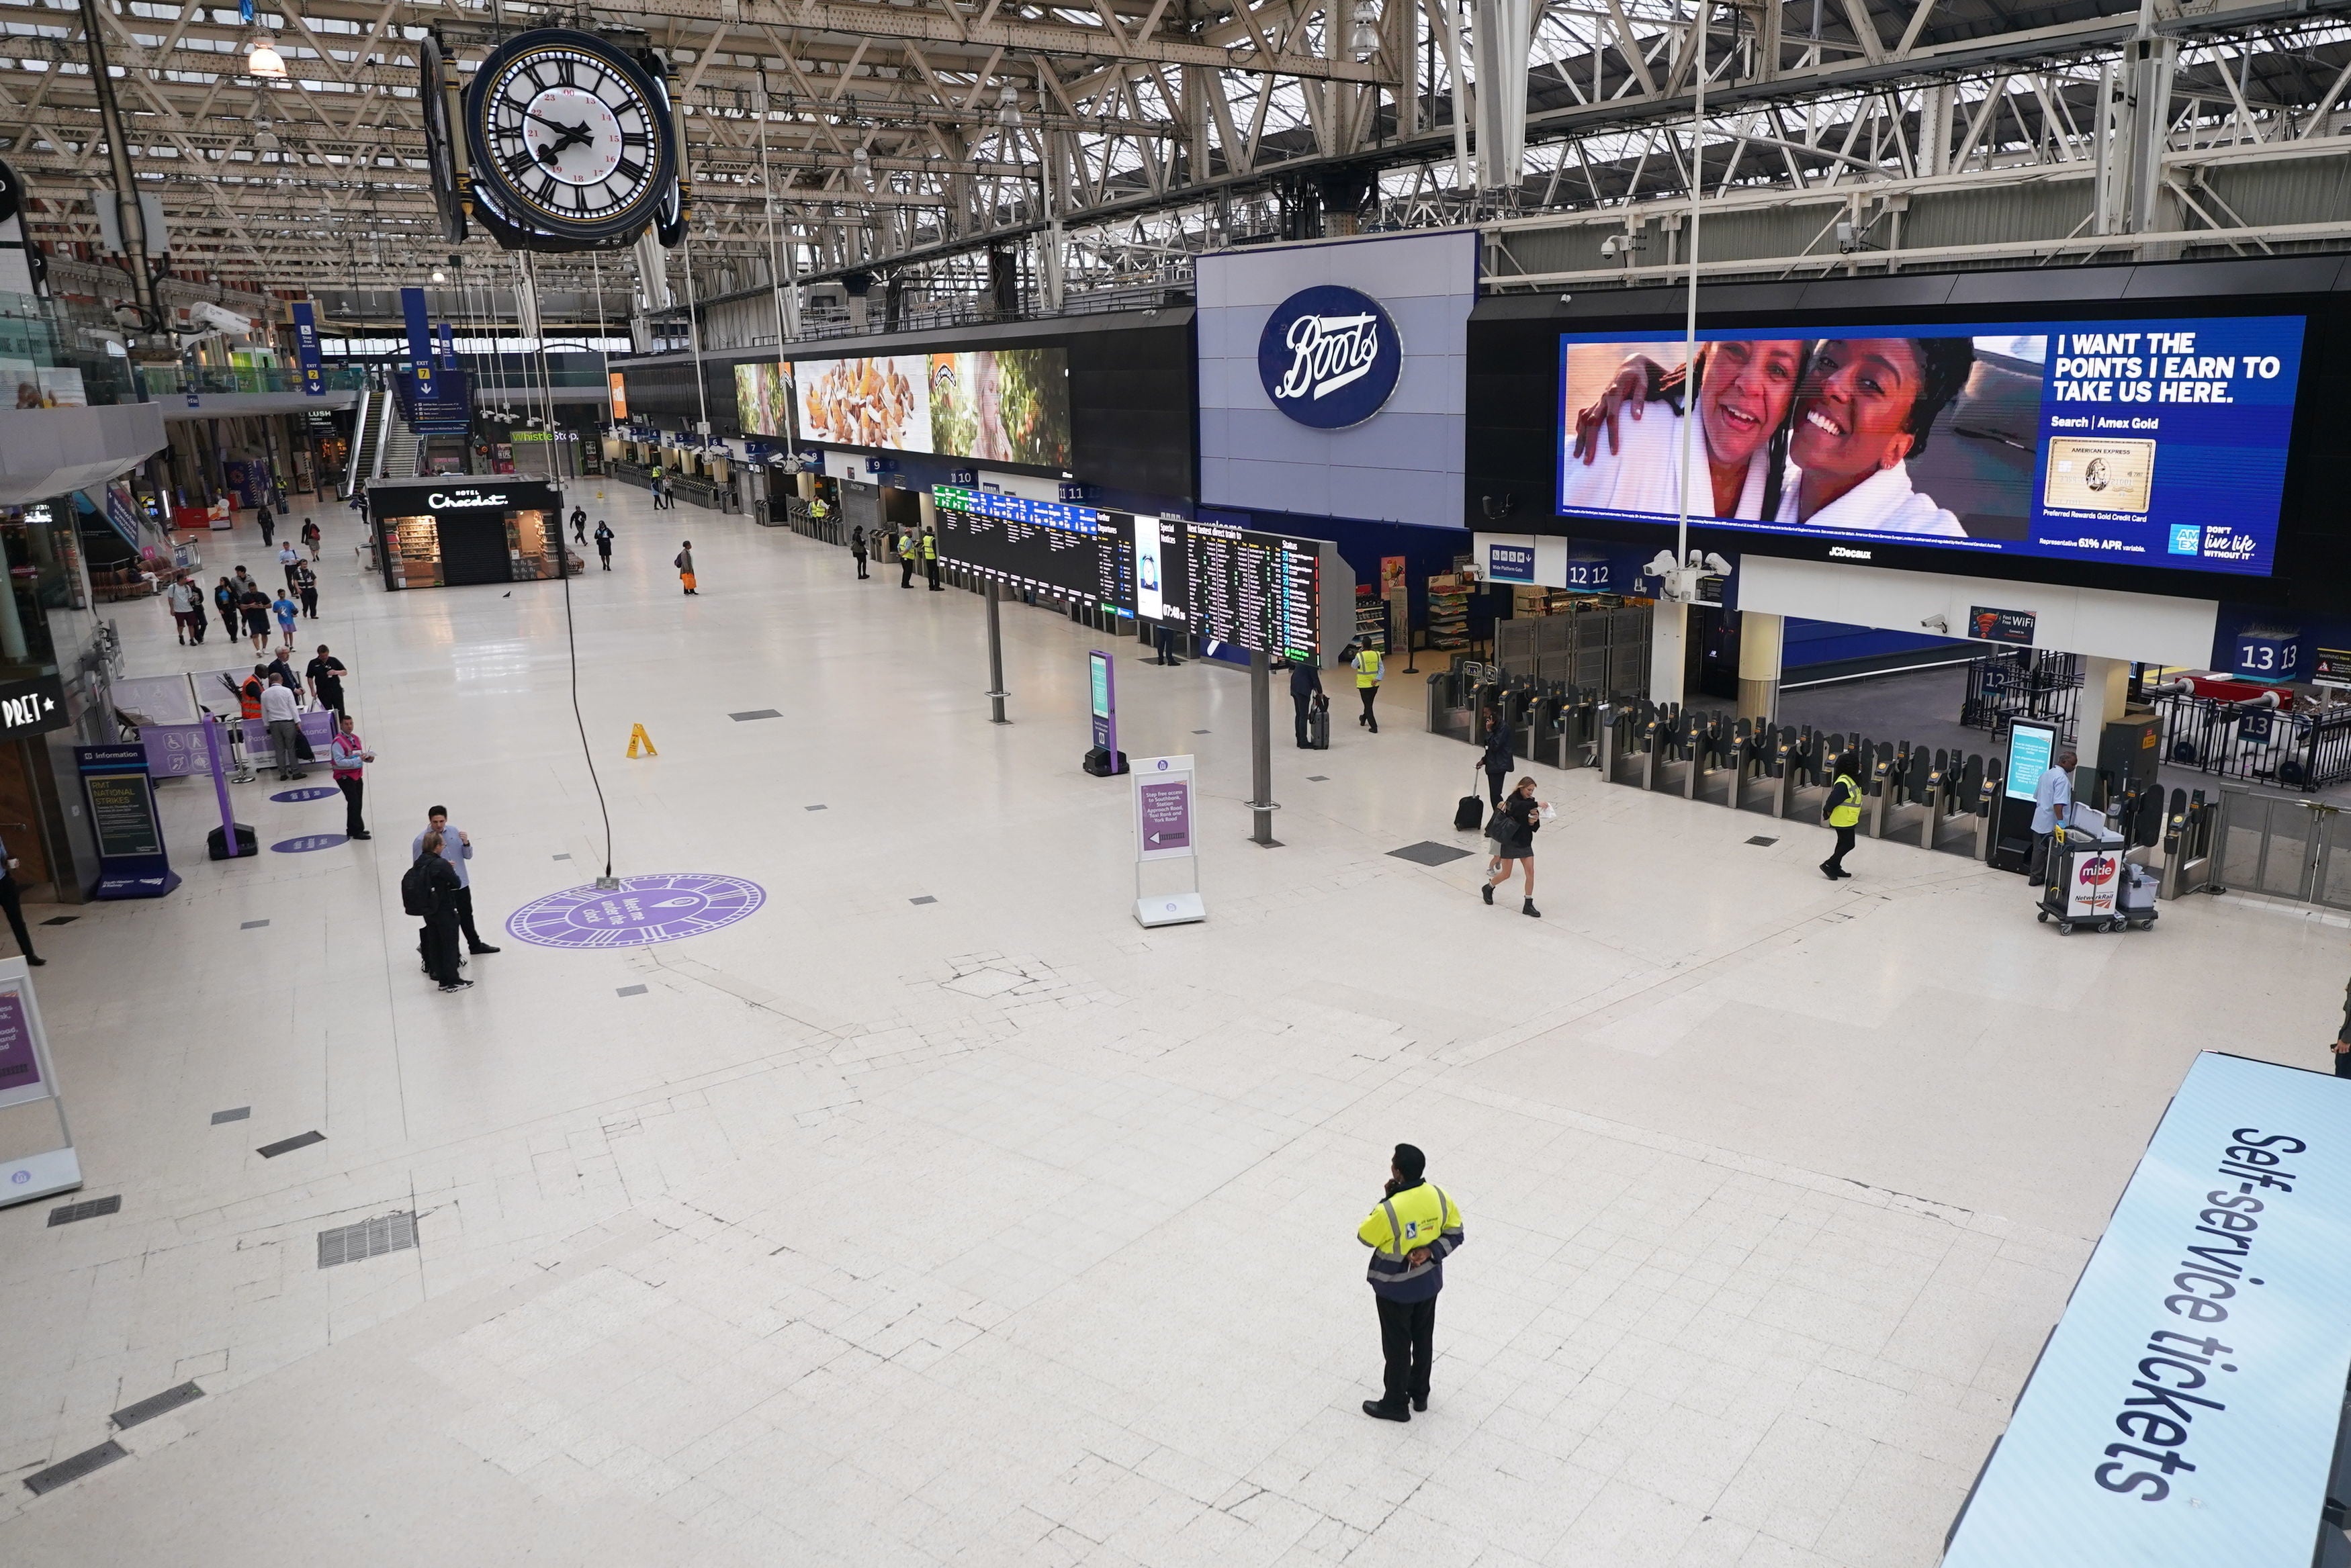 London’s Waterloo station is much emptier than it used to be